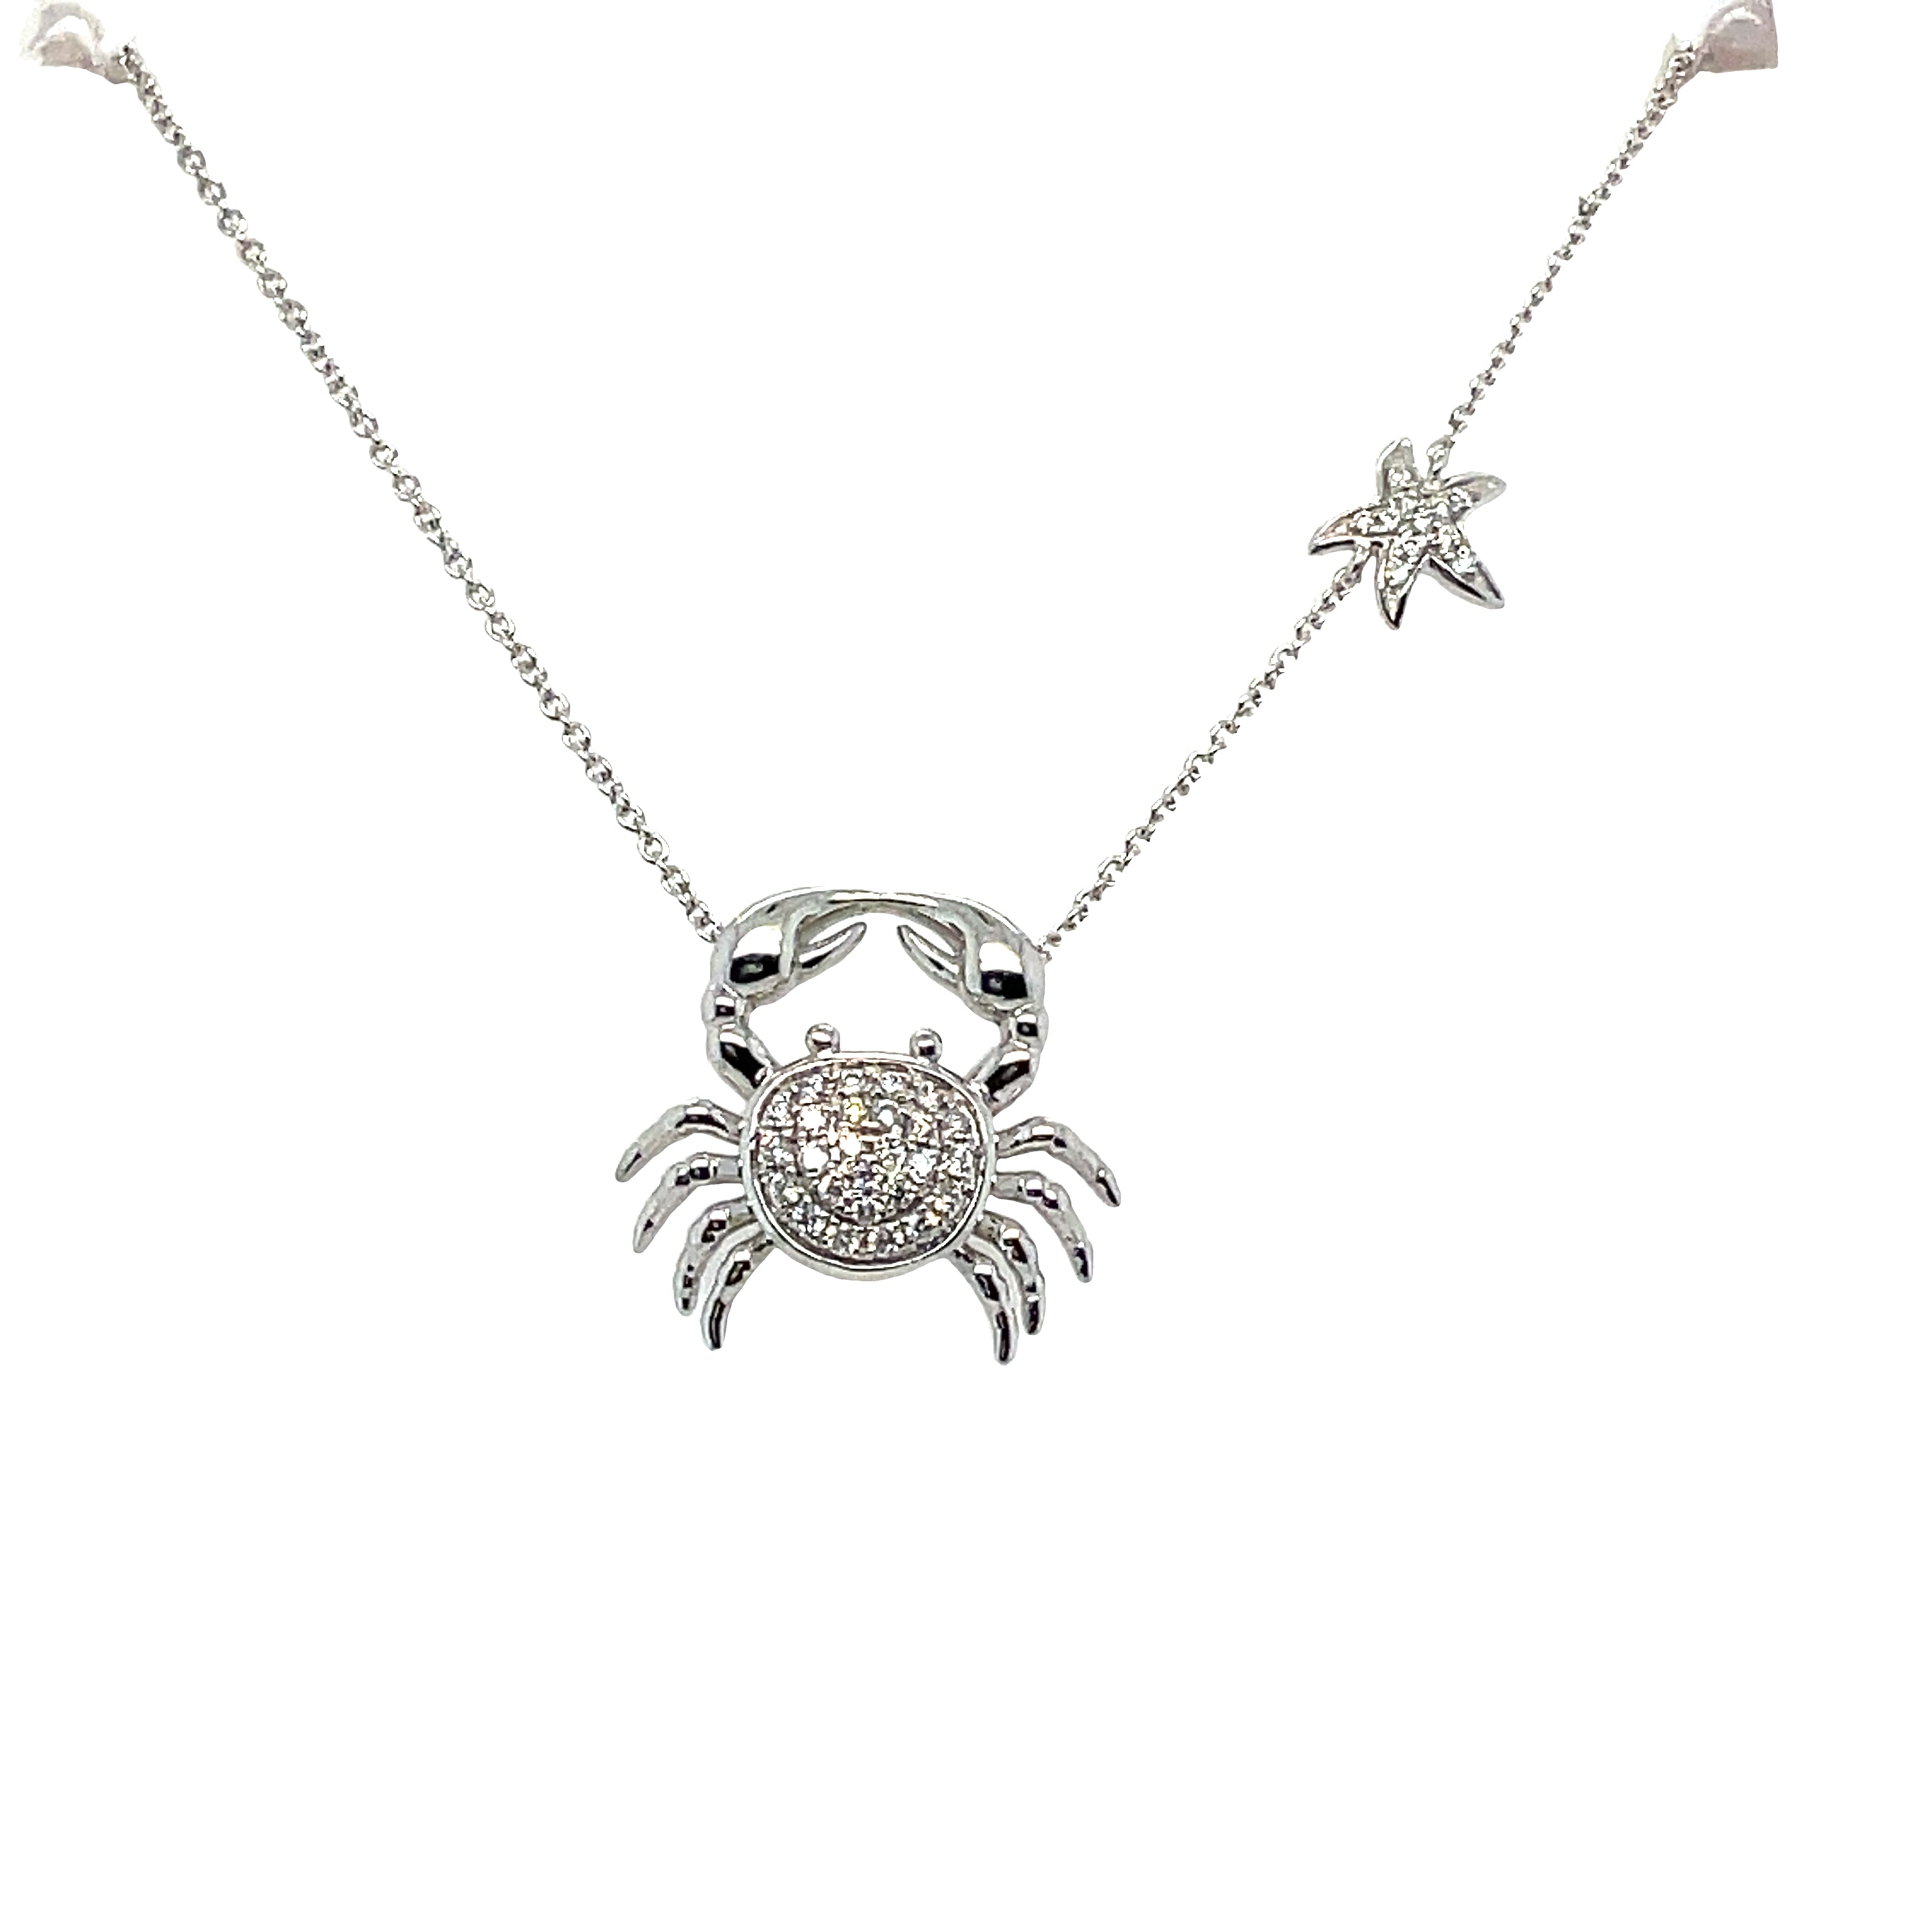 Coastal Charm Necklace – Sterling Silver Crab & Starfish Pendant